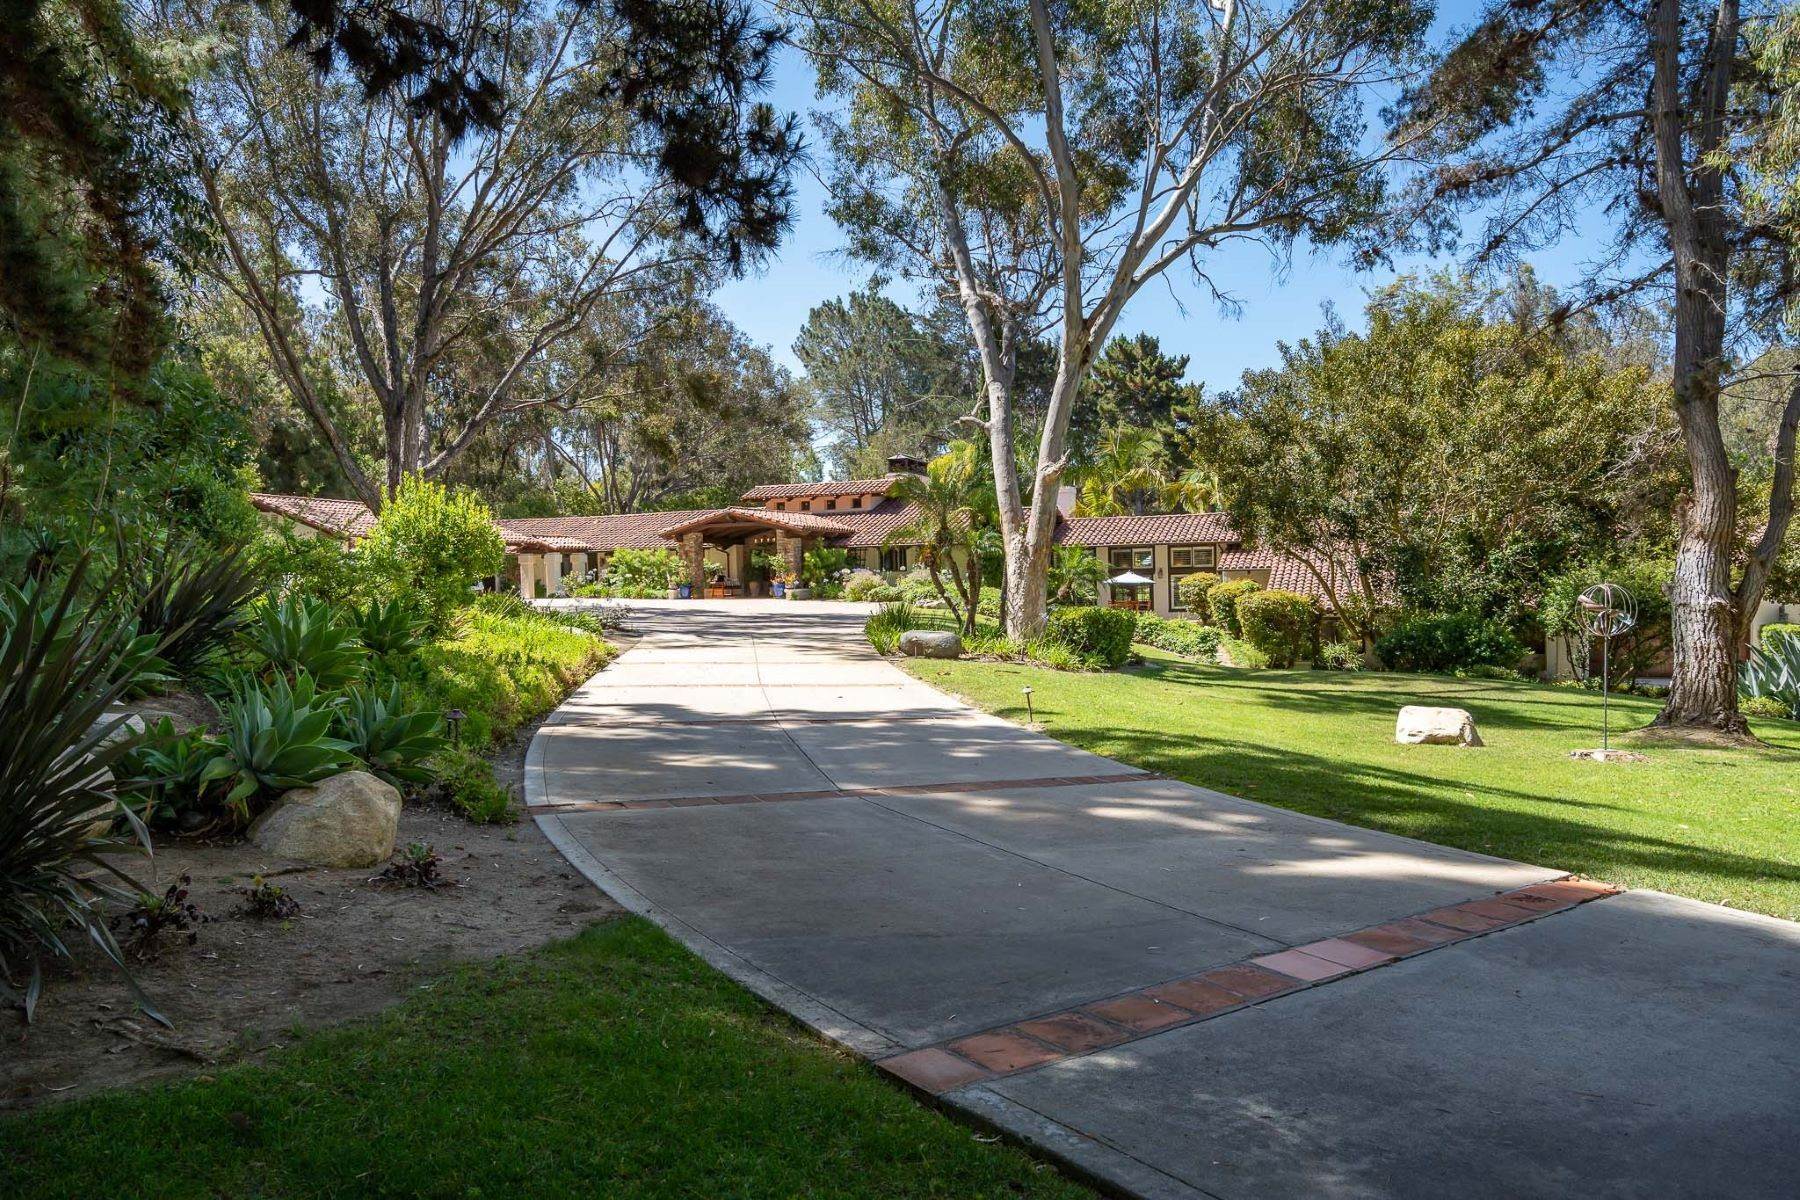 Single Family Homes for Sale at A HOME RUN - 4511 Via Gaviota, Rancho Santa Fe, CA 92091 A HOME RUN - 4511 Via Gaviota, Rancho Santa Fe, CA 92091, Rancho Santa Fe, California 92067 United States